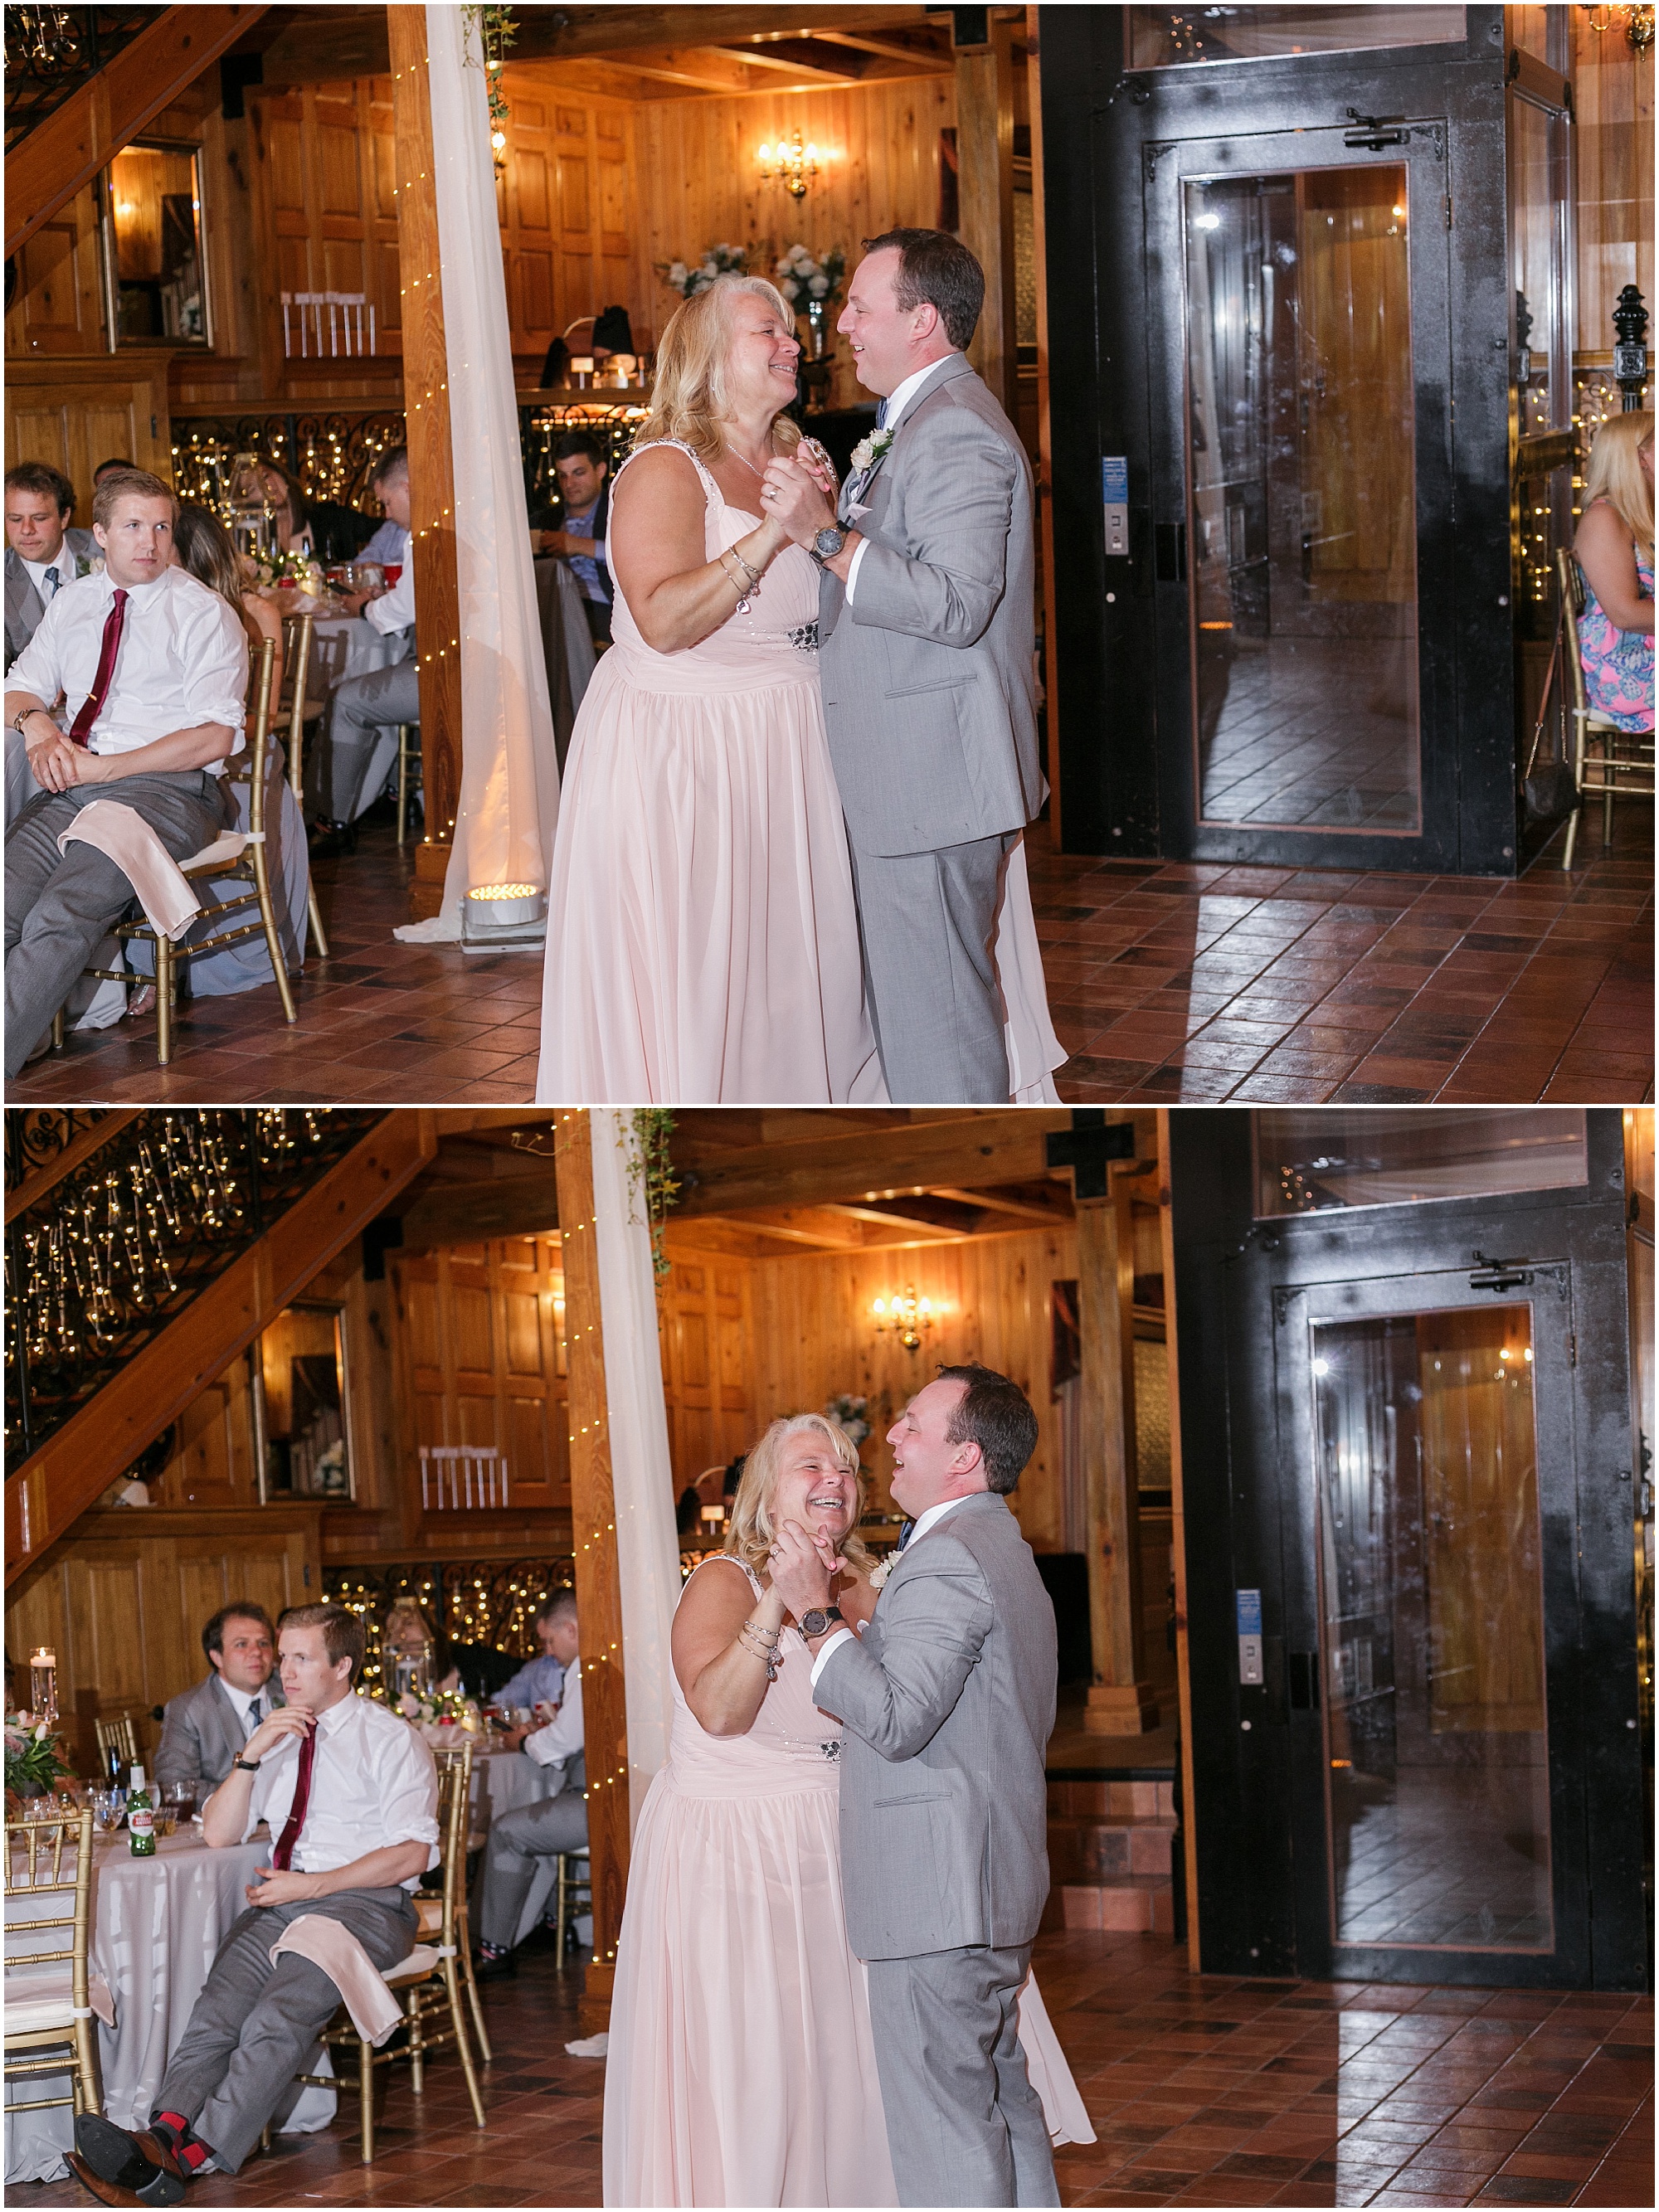 Mother dances with her son at his wedding.